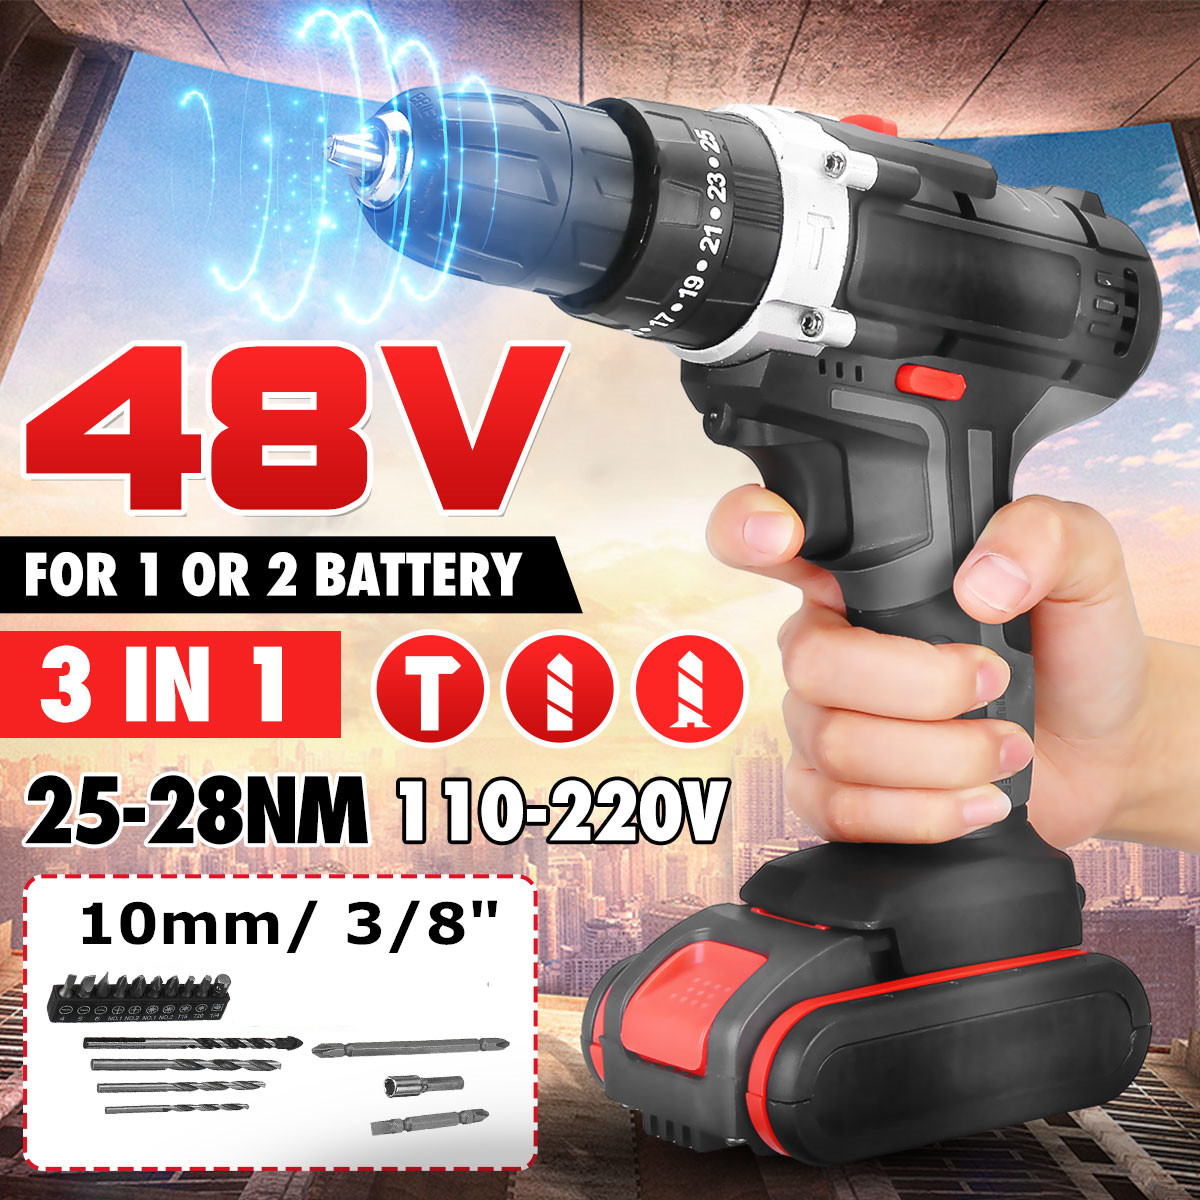 48V 3 in 1 Cordless Electric Drill Screwdriver 2 Speed 25+3 Turque Wireless Power Driver Tools Set with 2 x 6000MAH Battery